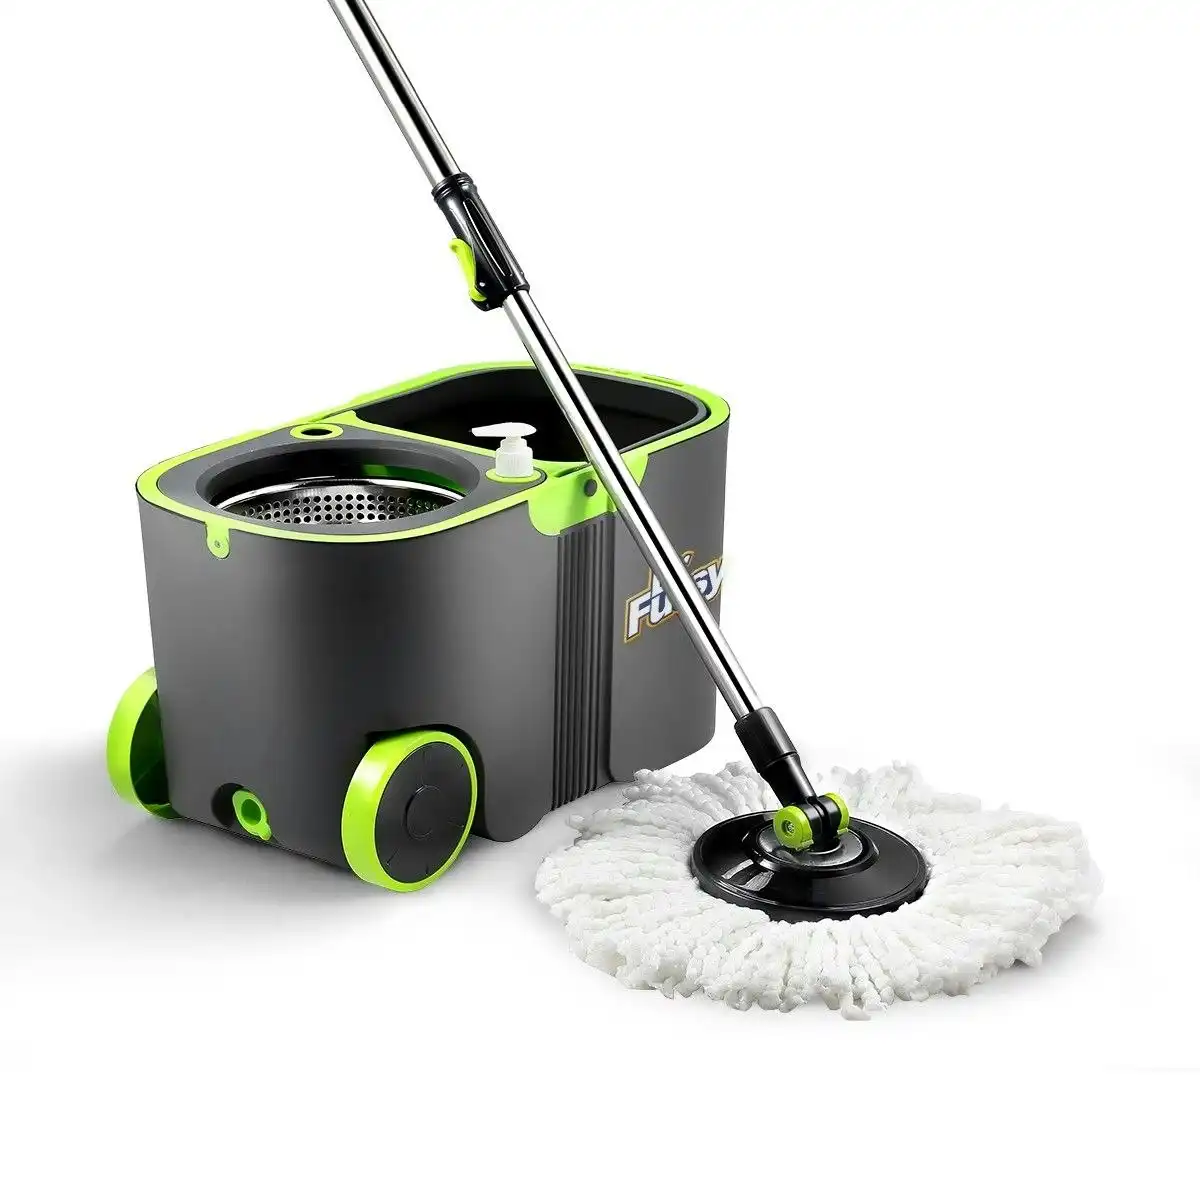 Dr FUSSY 360 Degree Spin Floor Mop Bucket System with 4 Extra Microfiber Heads